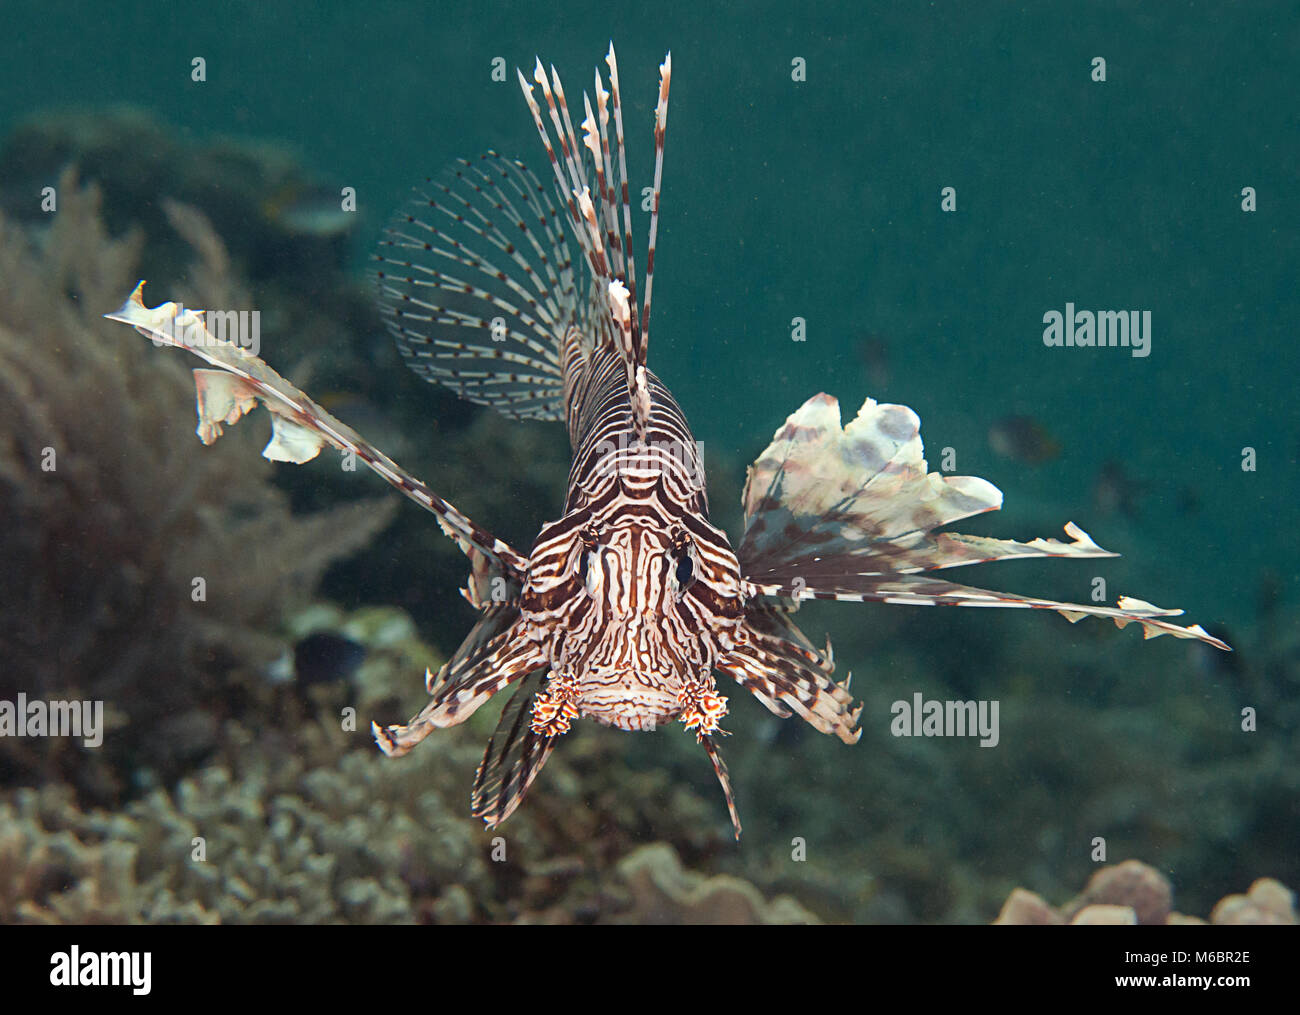 Indo-Pacific Lionfish (Pterois volitans) swimming over corals of Bali Stock Photo